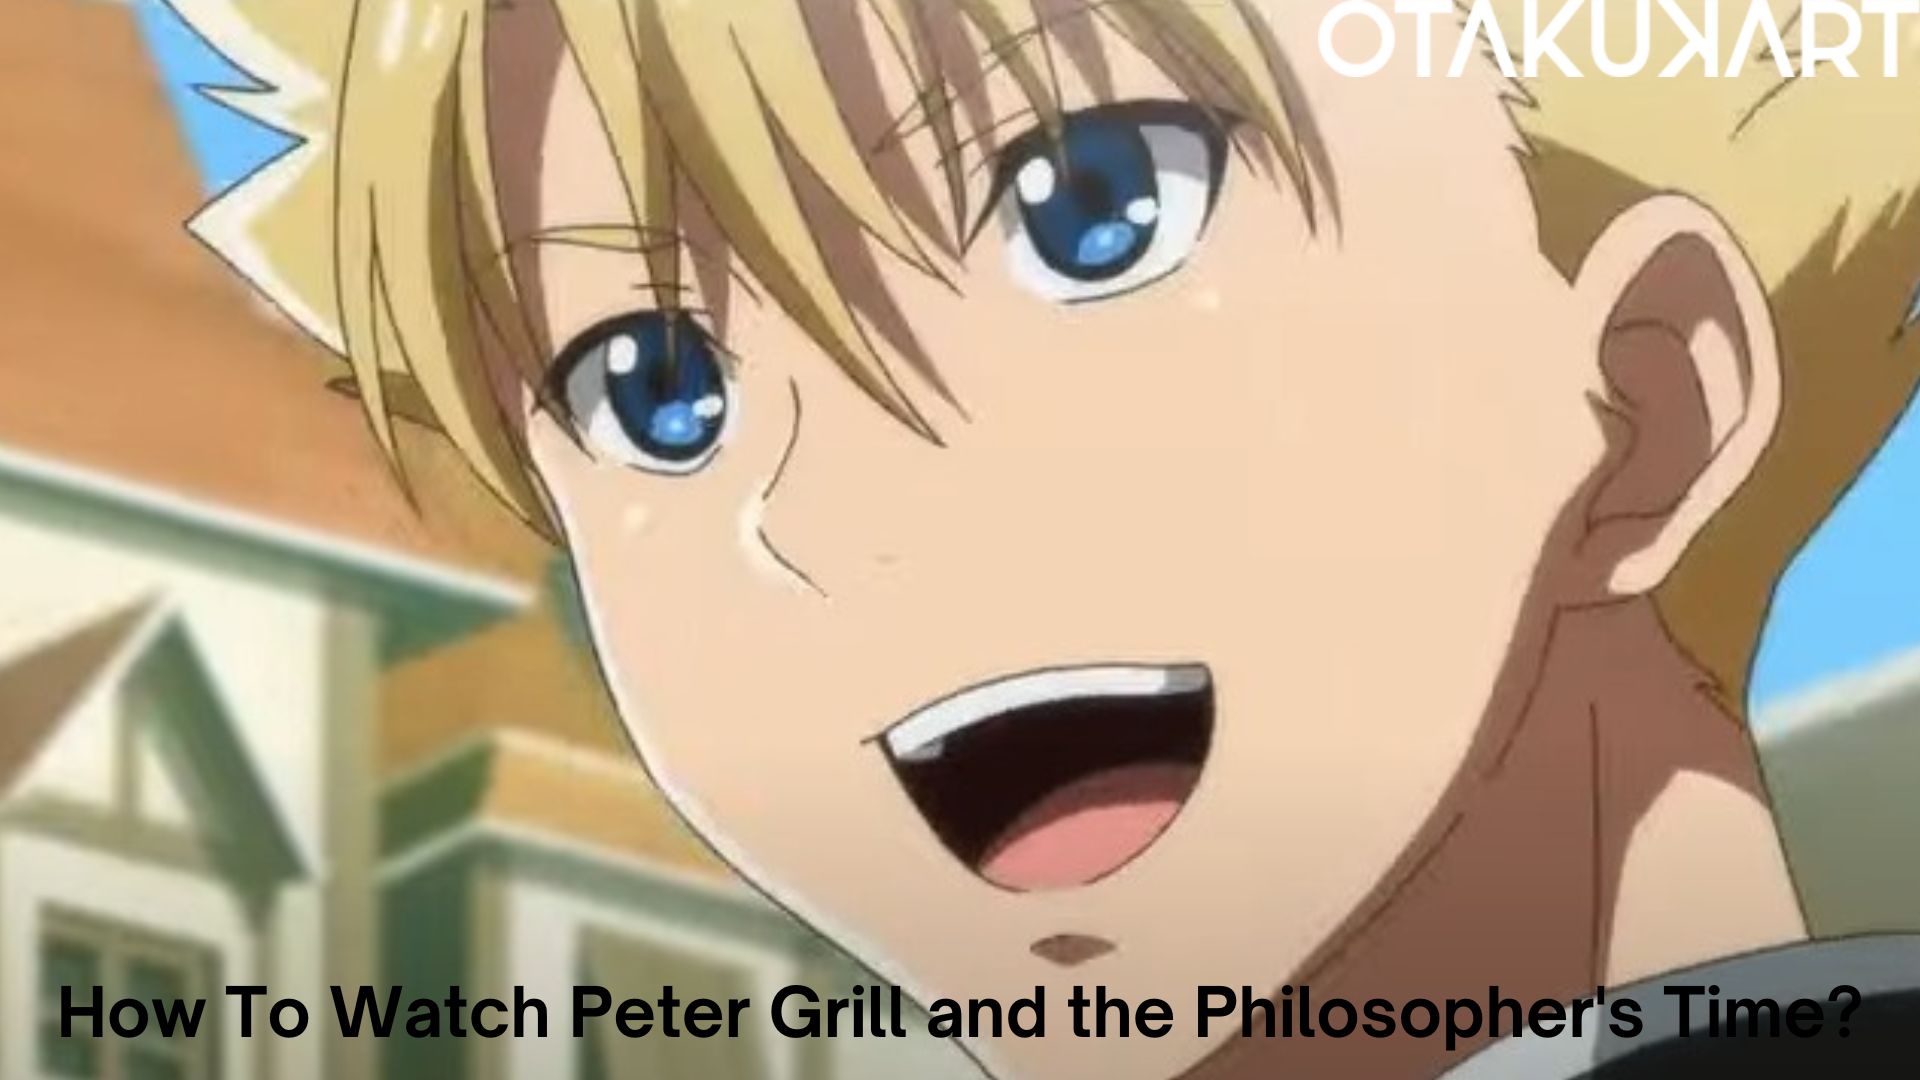 How to Watch Peter Grill and Philosopher's Time